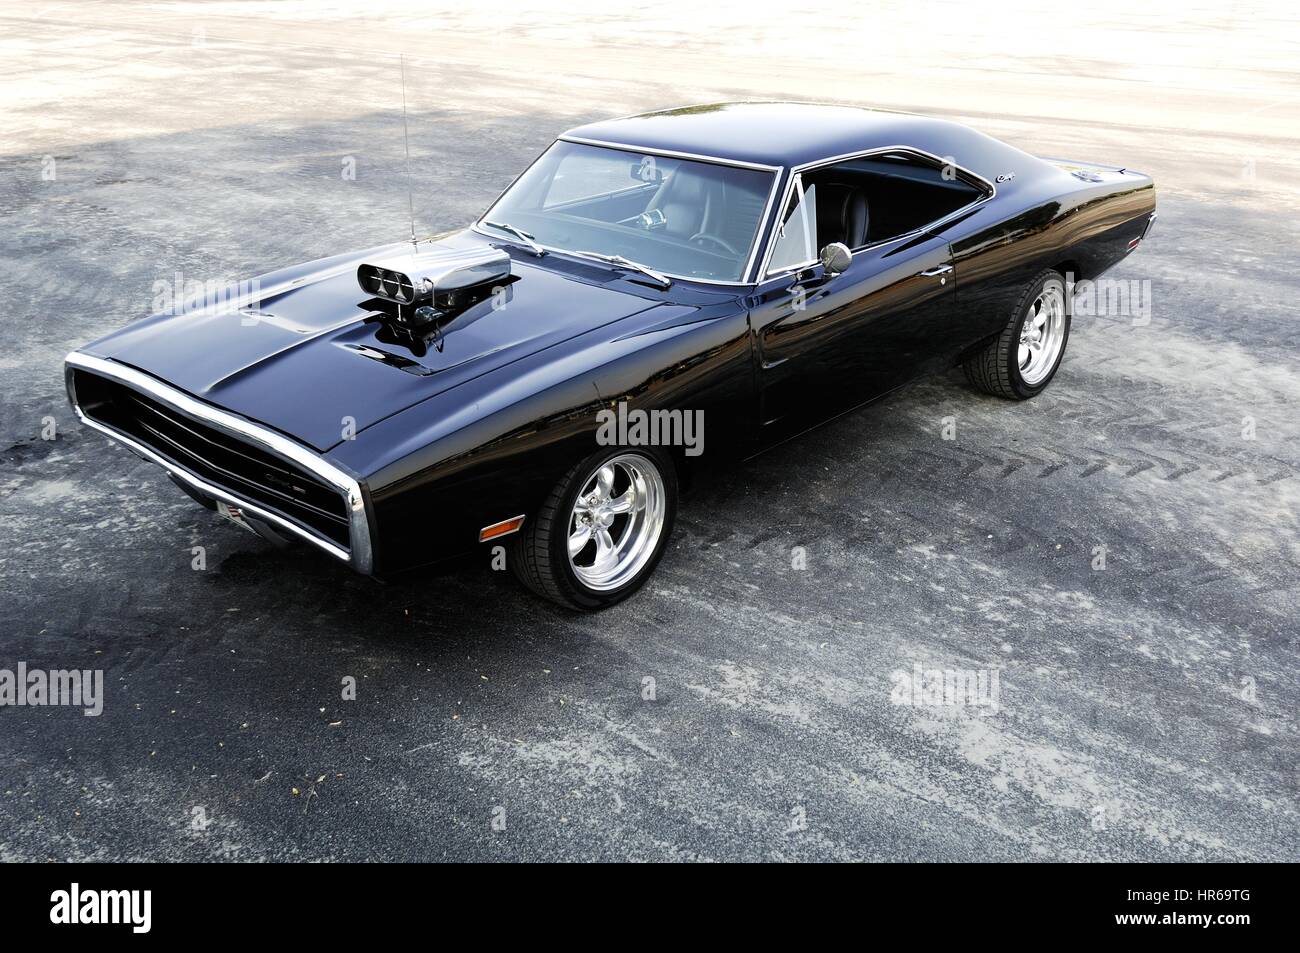 dodge charger 1970 muscle car classic cars american with air intake on the hood Stock Photo